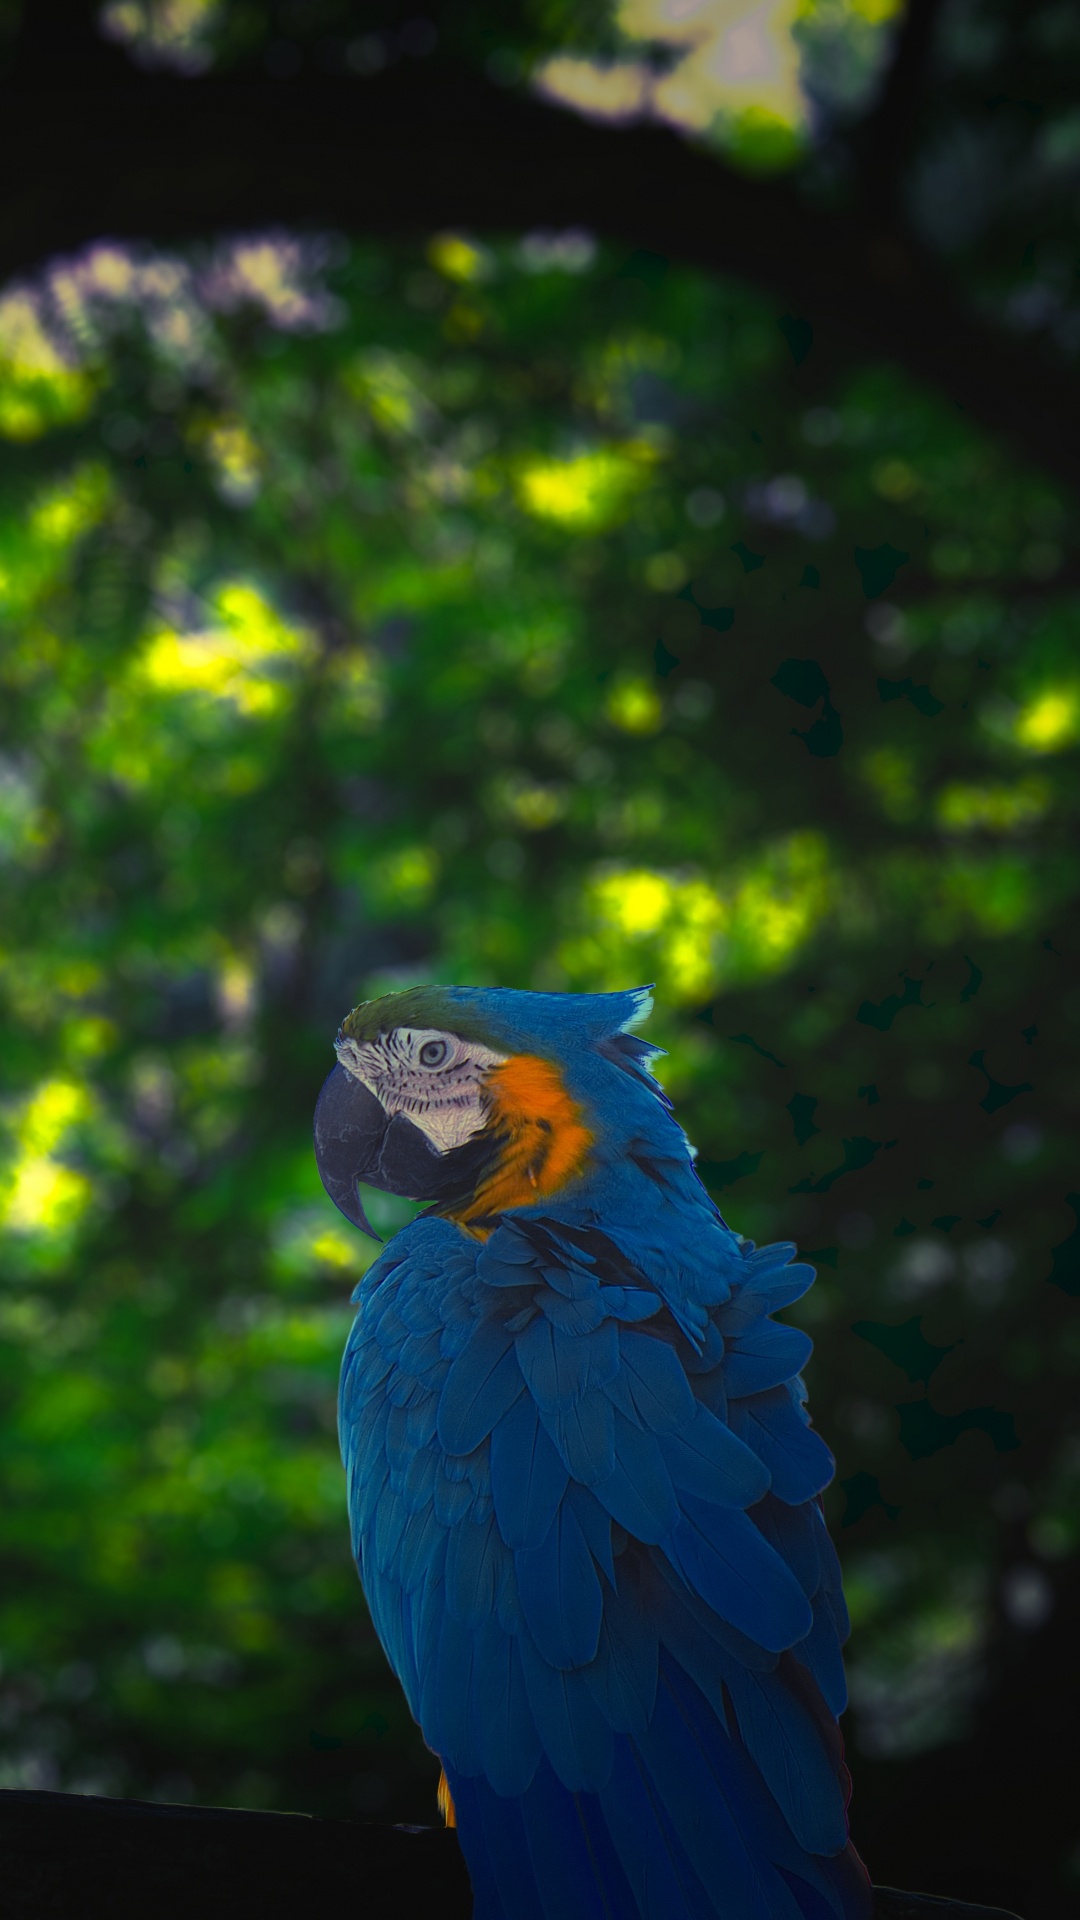 Blue and Yellow Macaw on Black Wooden Fence During Daytime. Wallpaper in 1080x1920 Resolution